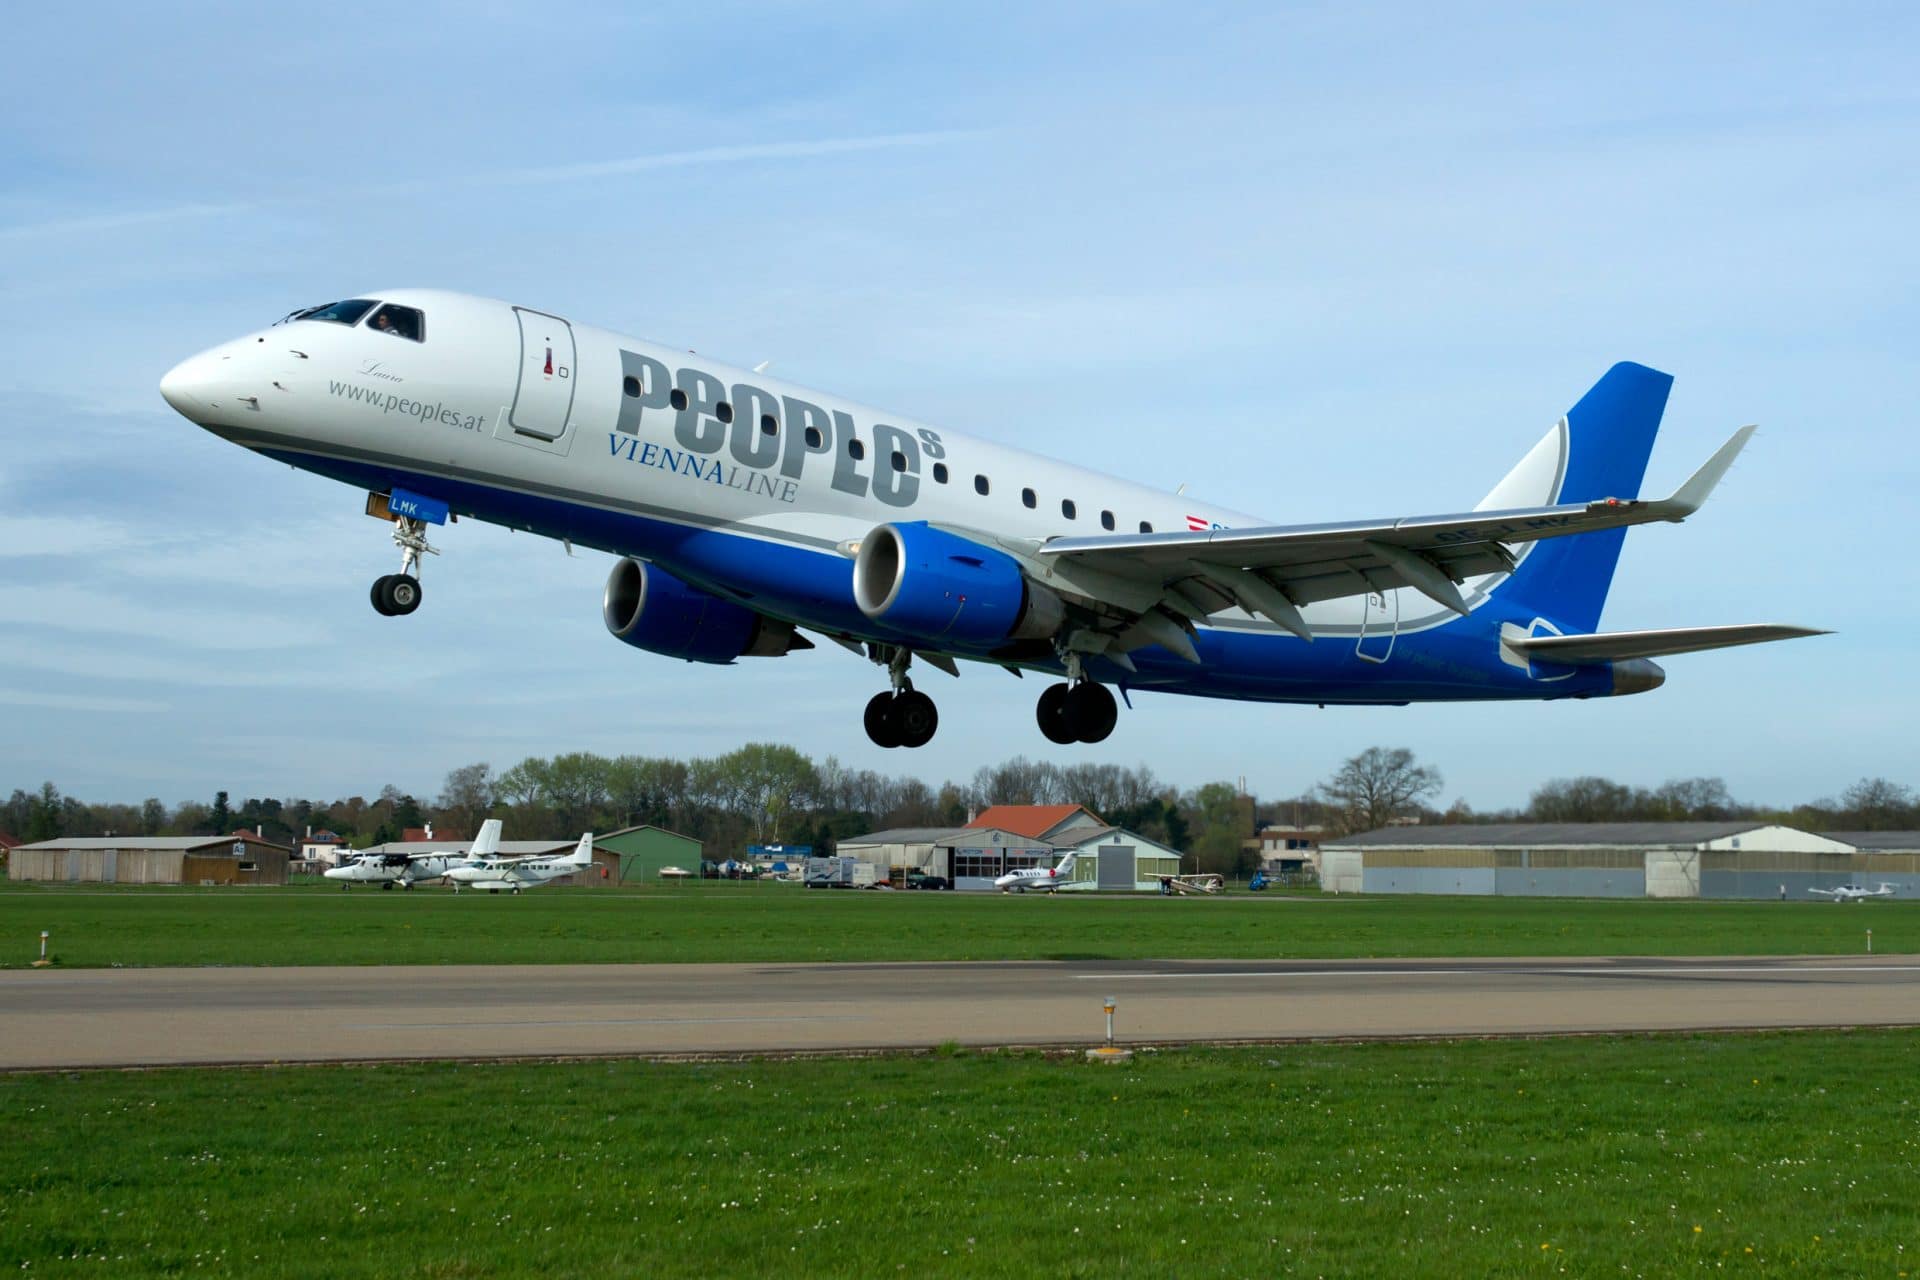 People's Embraer E170